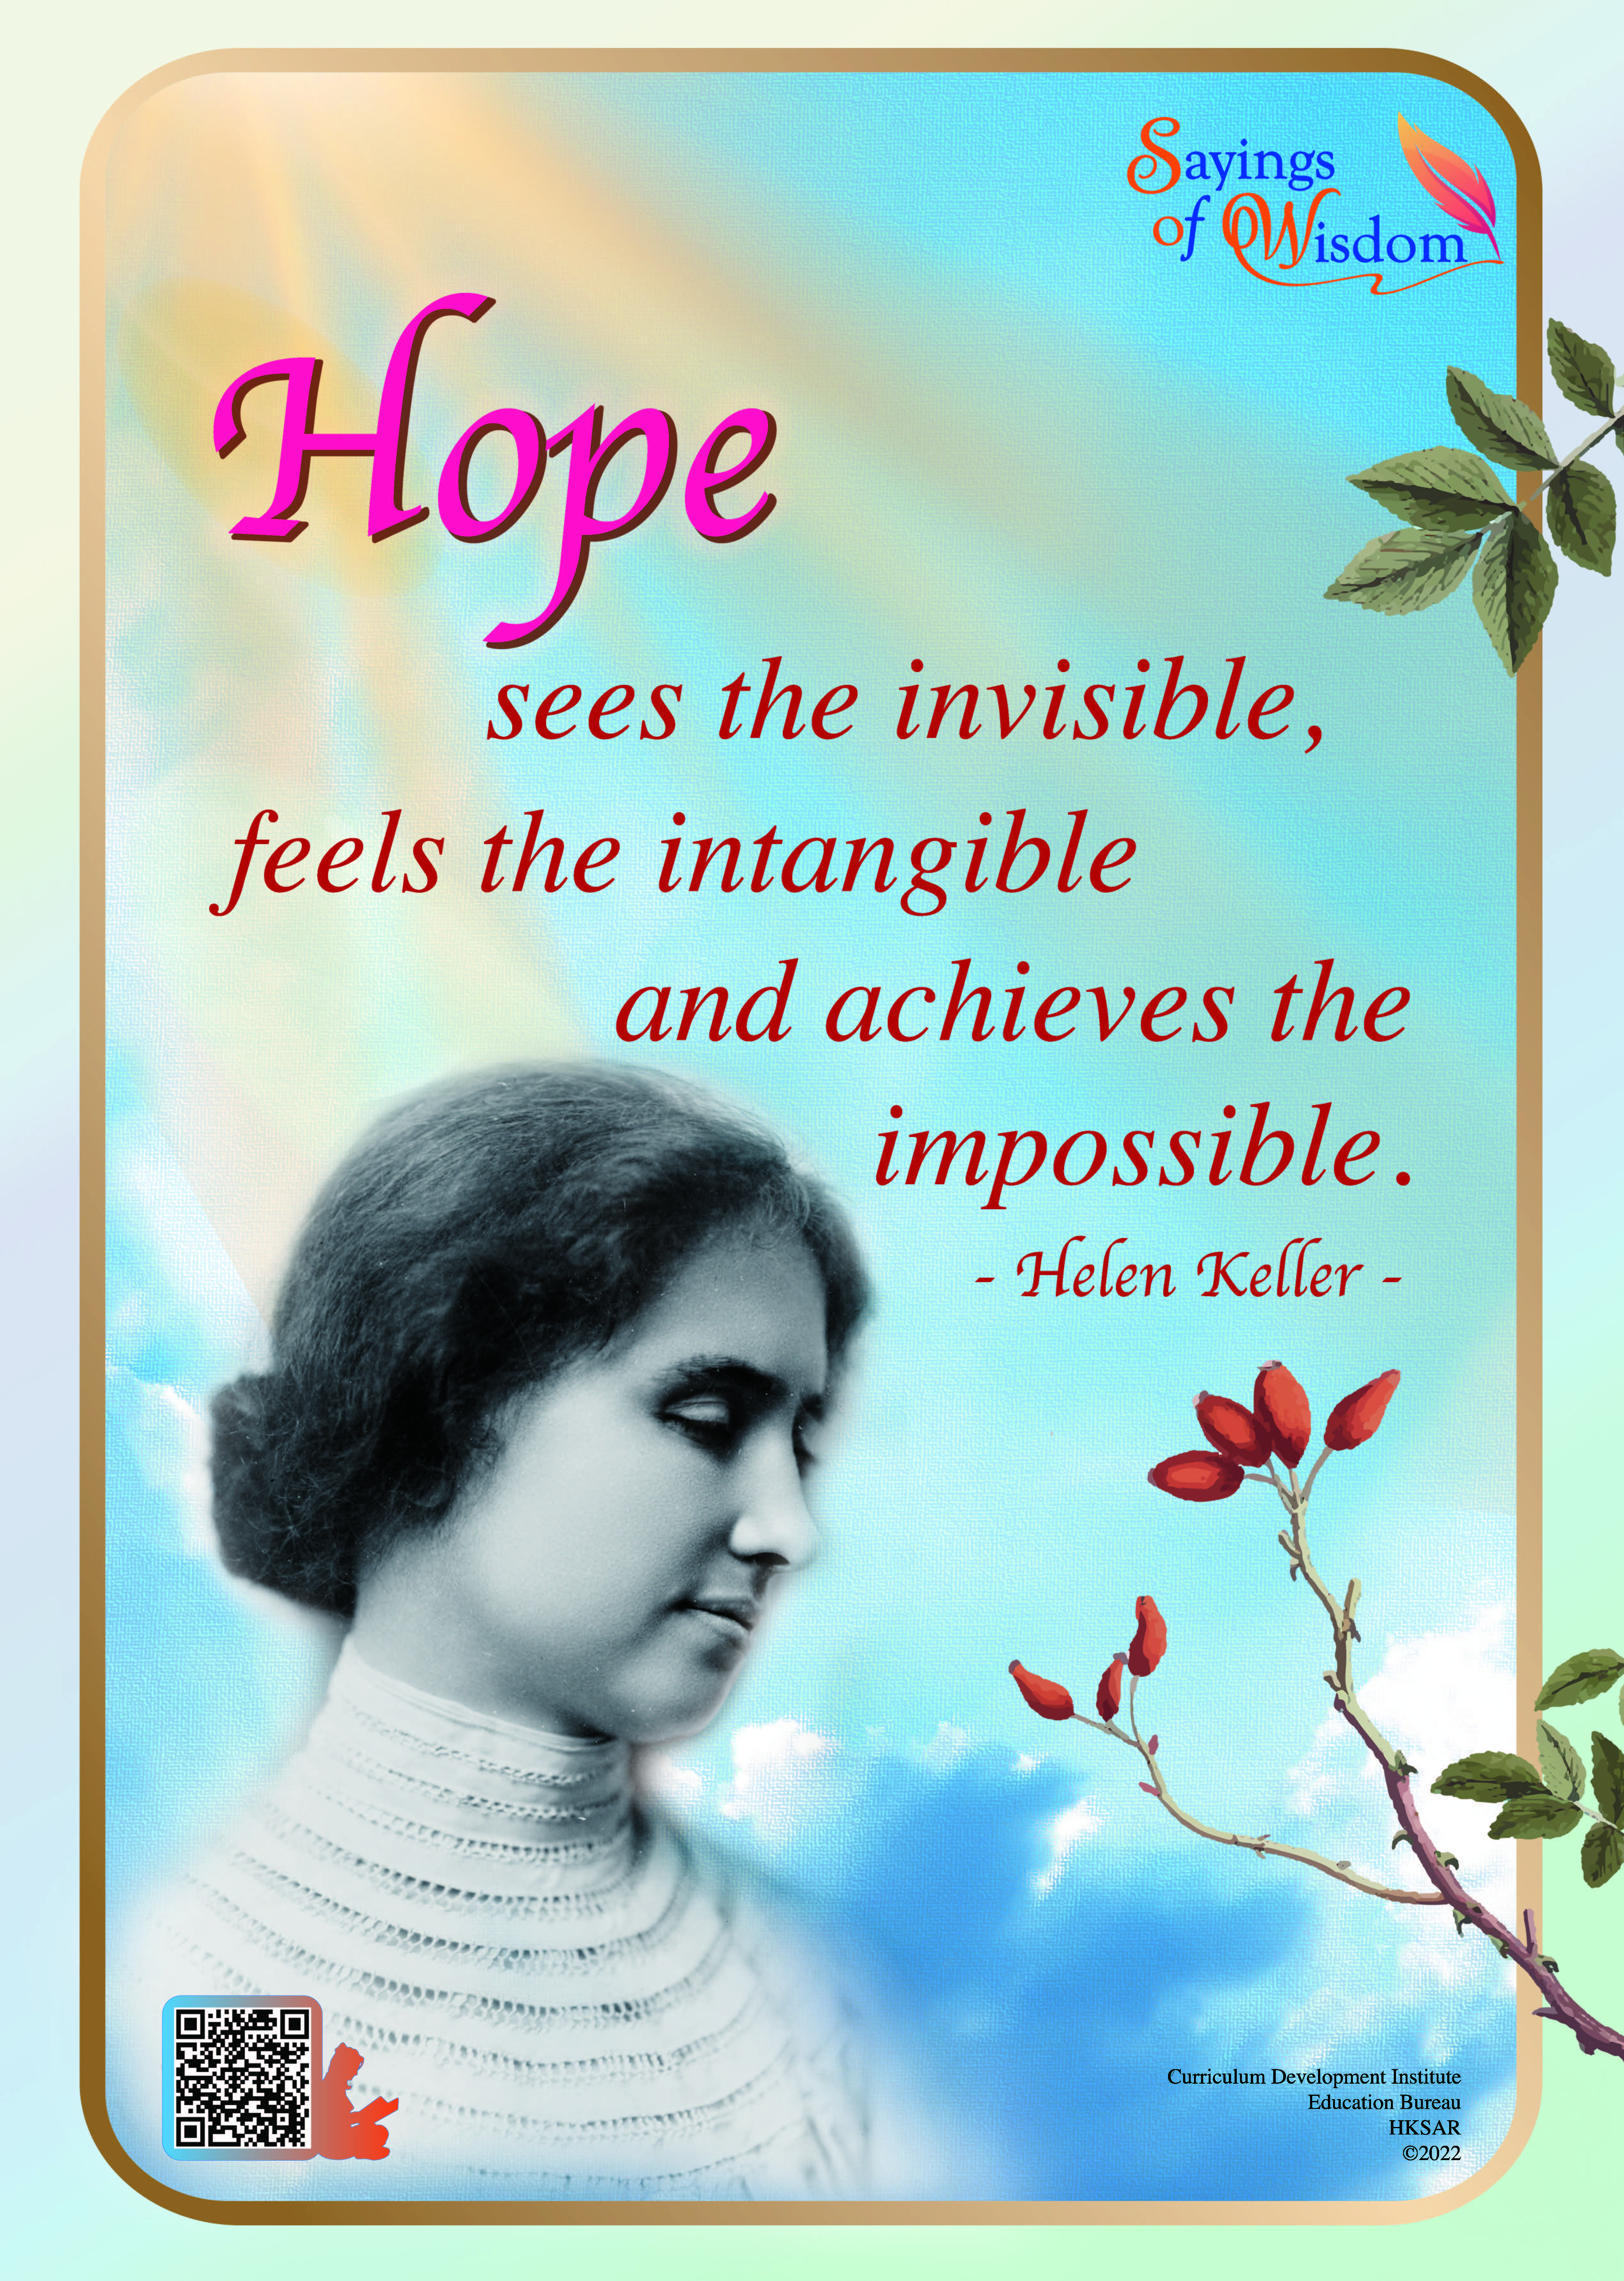 Hope sees the invisible, feels the intangible and achieves the impossible.